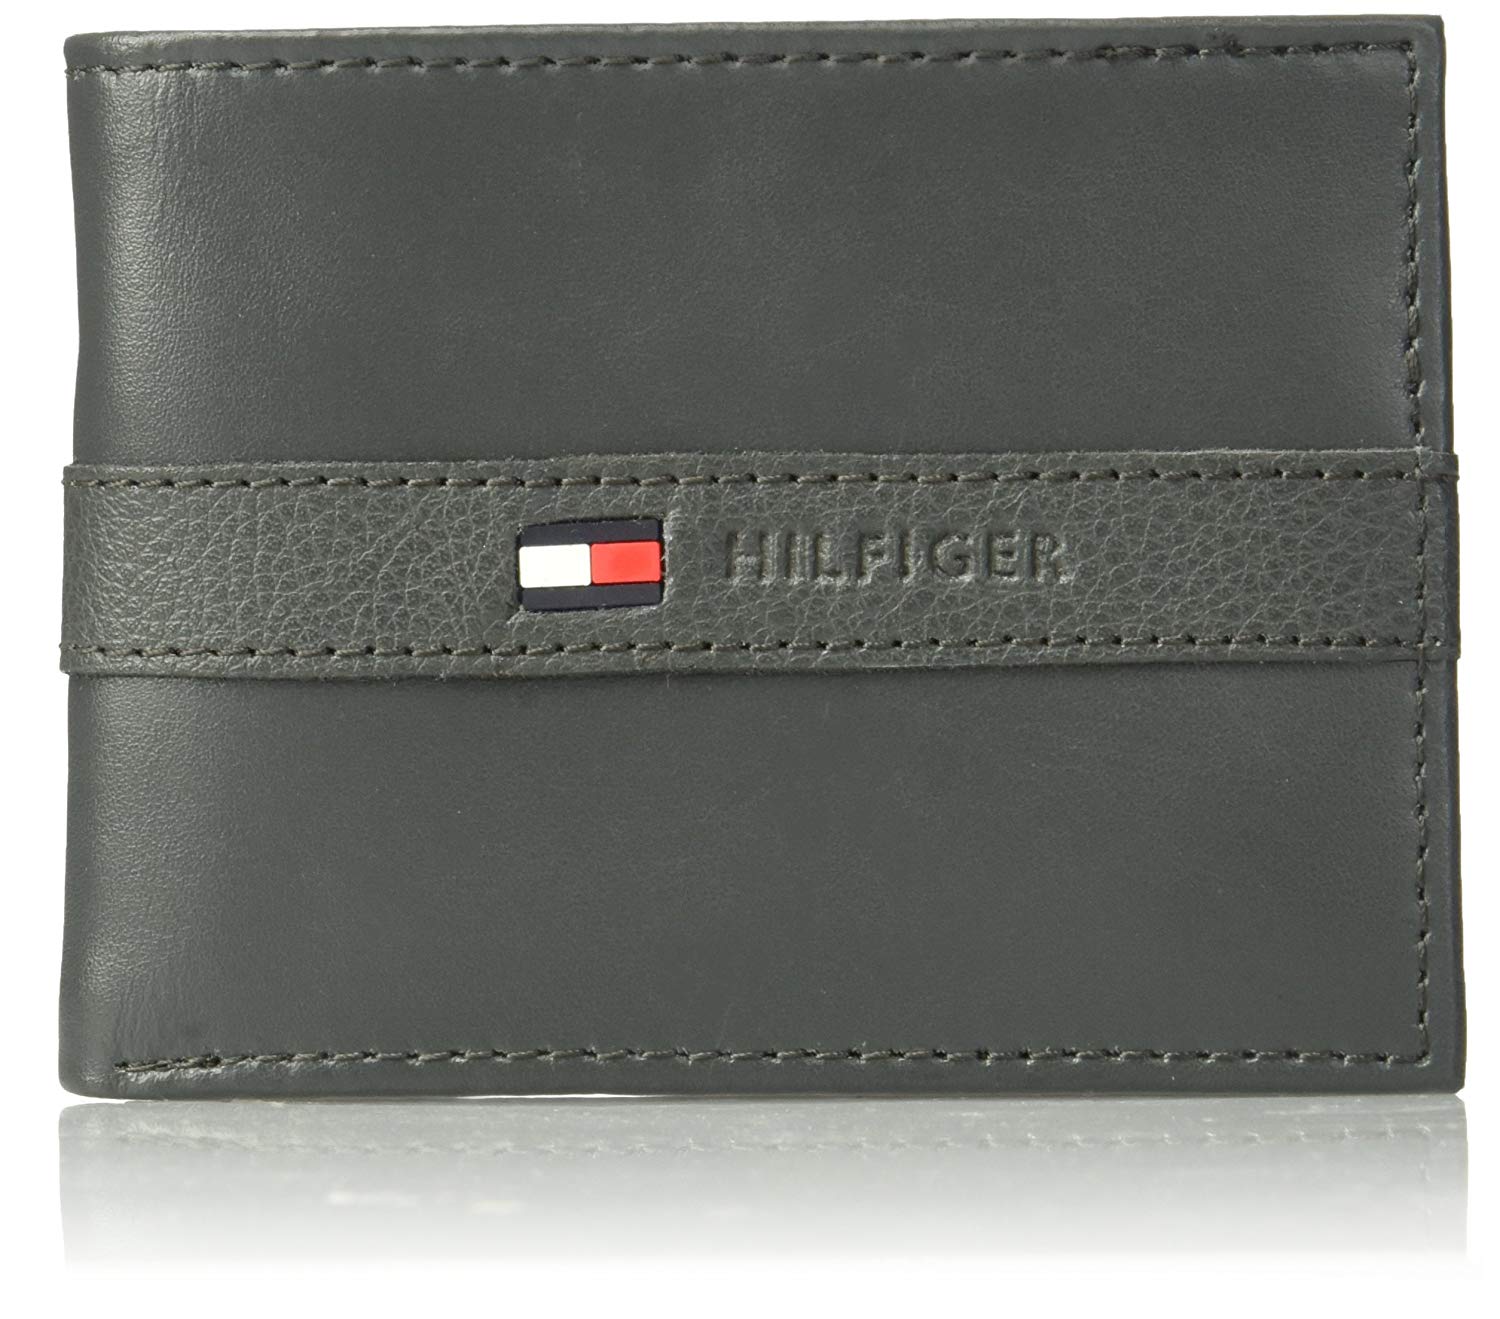 tommy hilfiger men's thin sleek casual bifold wallet with 6 credit card pockets and removable id window